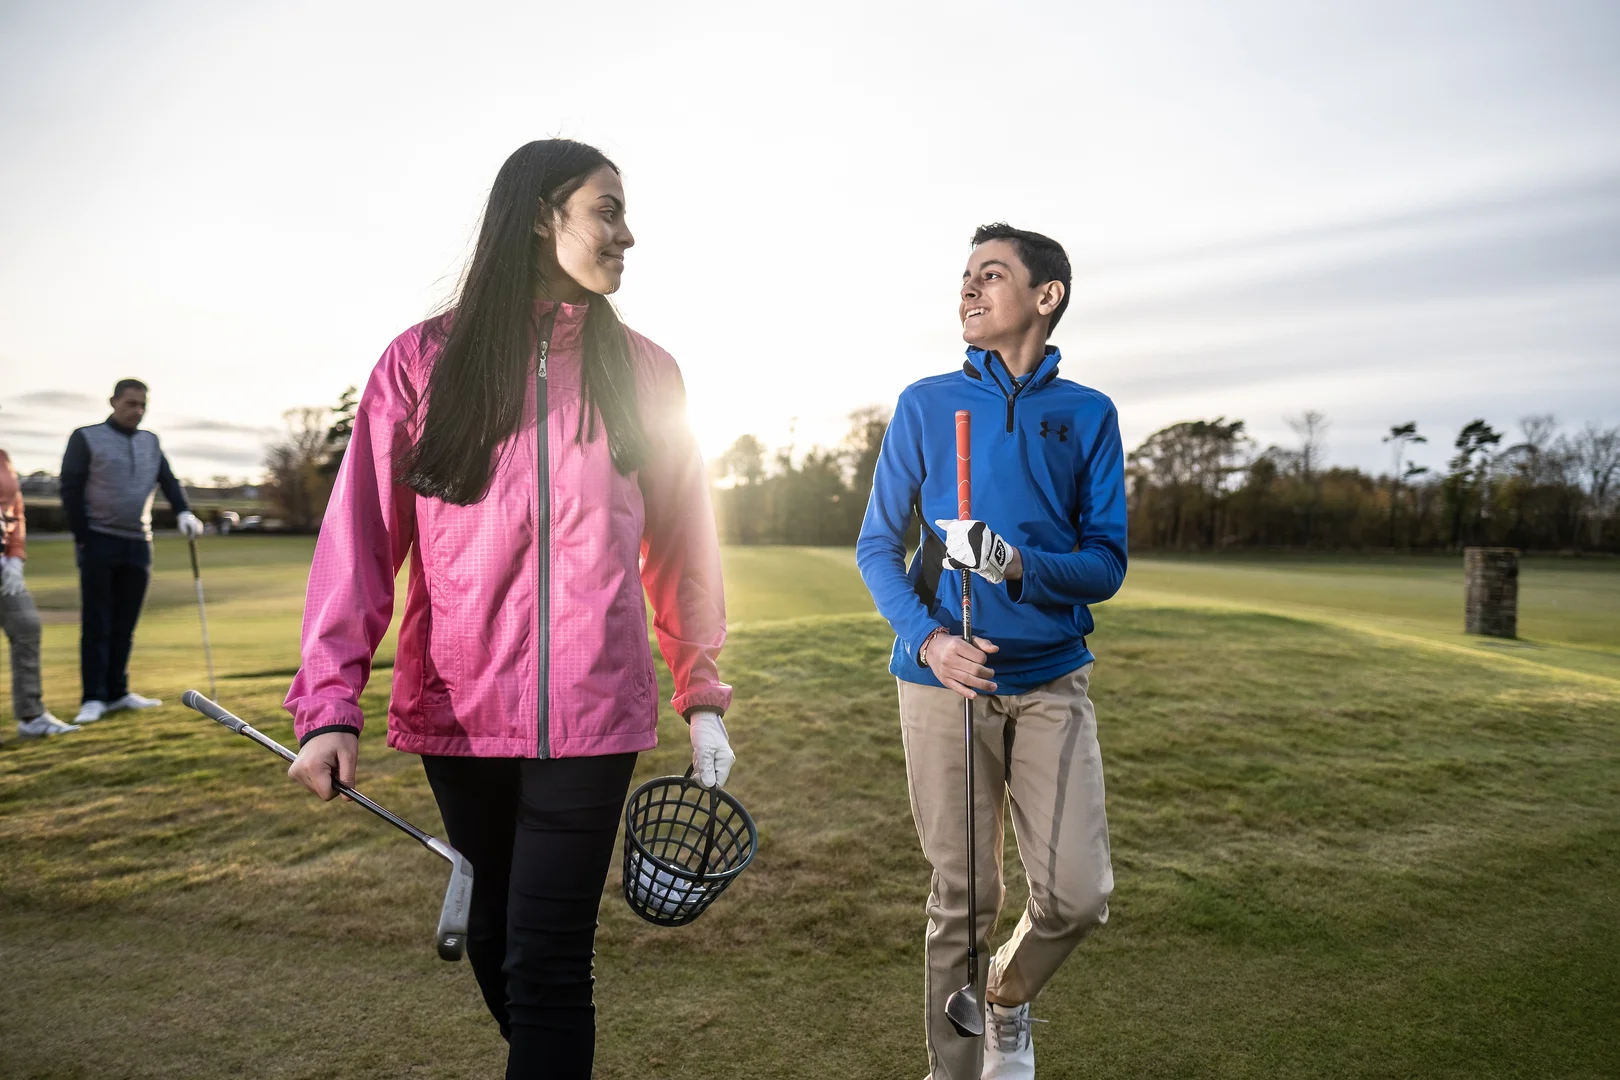 Two junior golfers on a driving range.